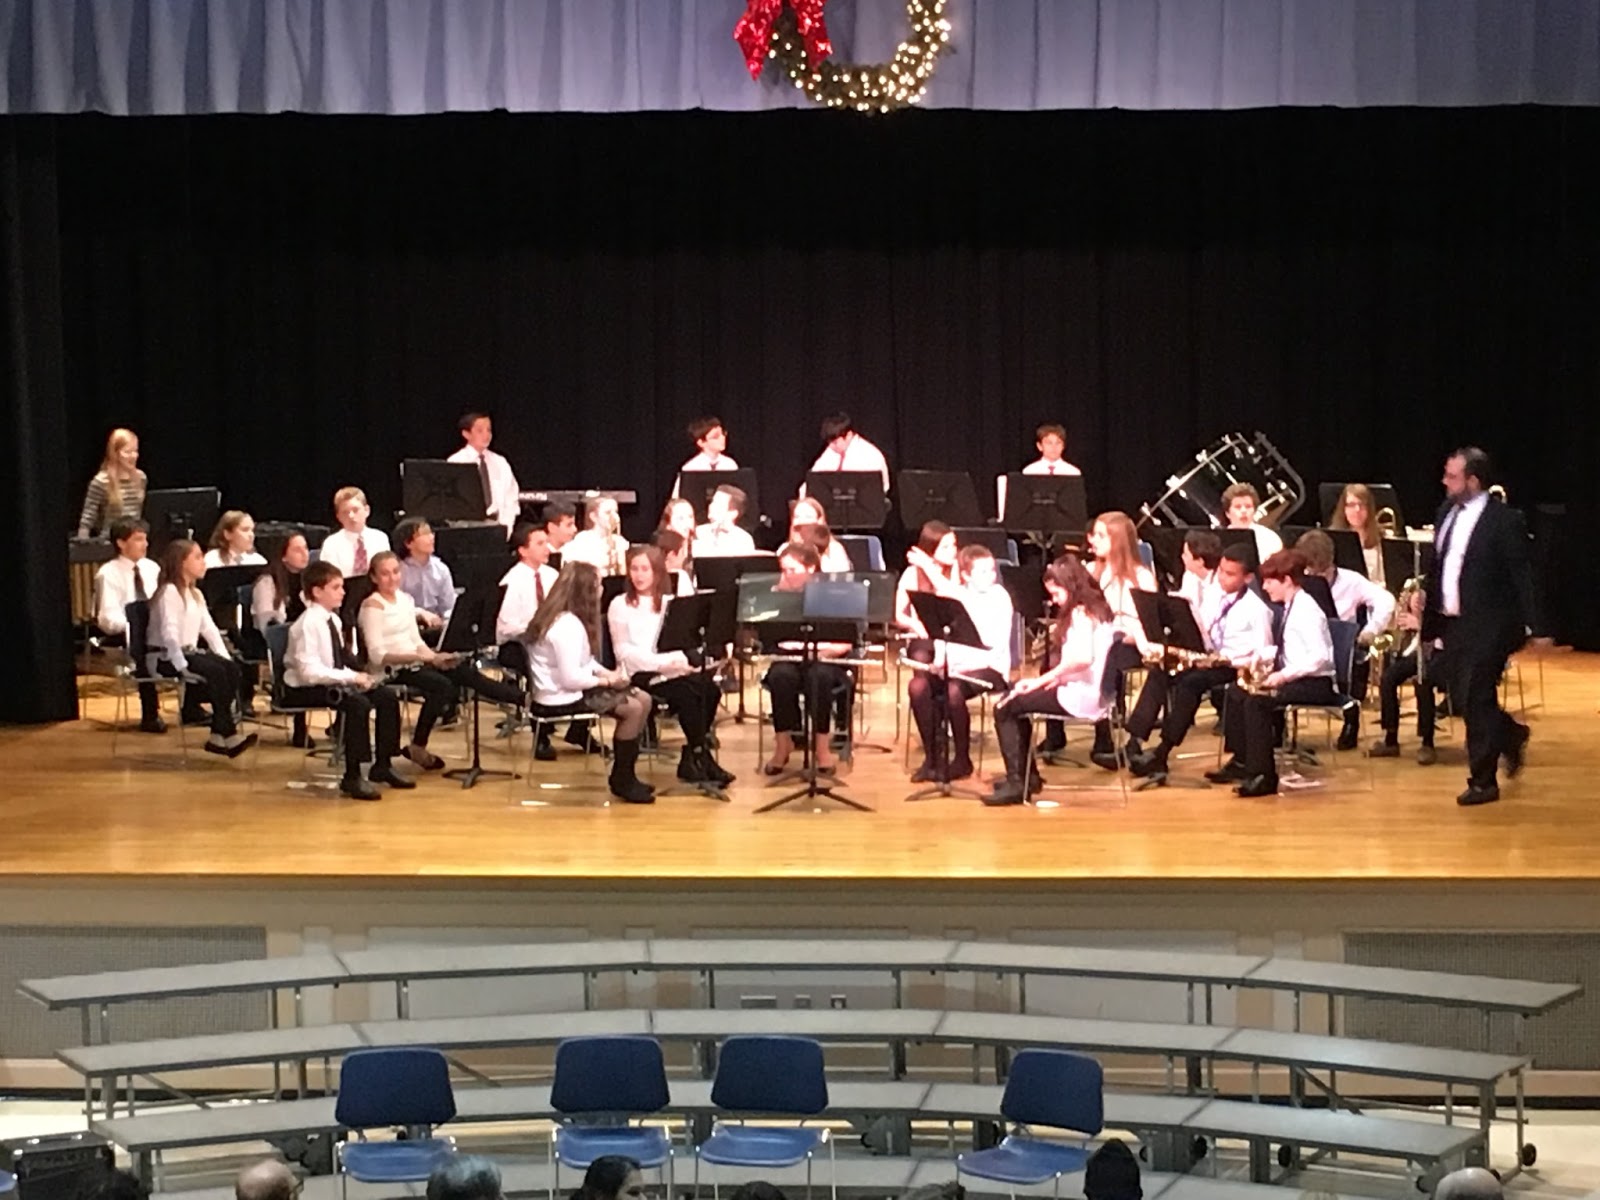 Memorial Middle School: Winter Concert Pics and Video